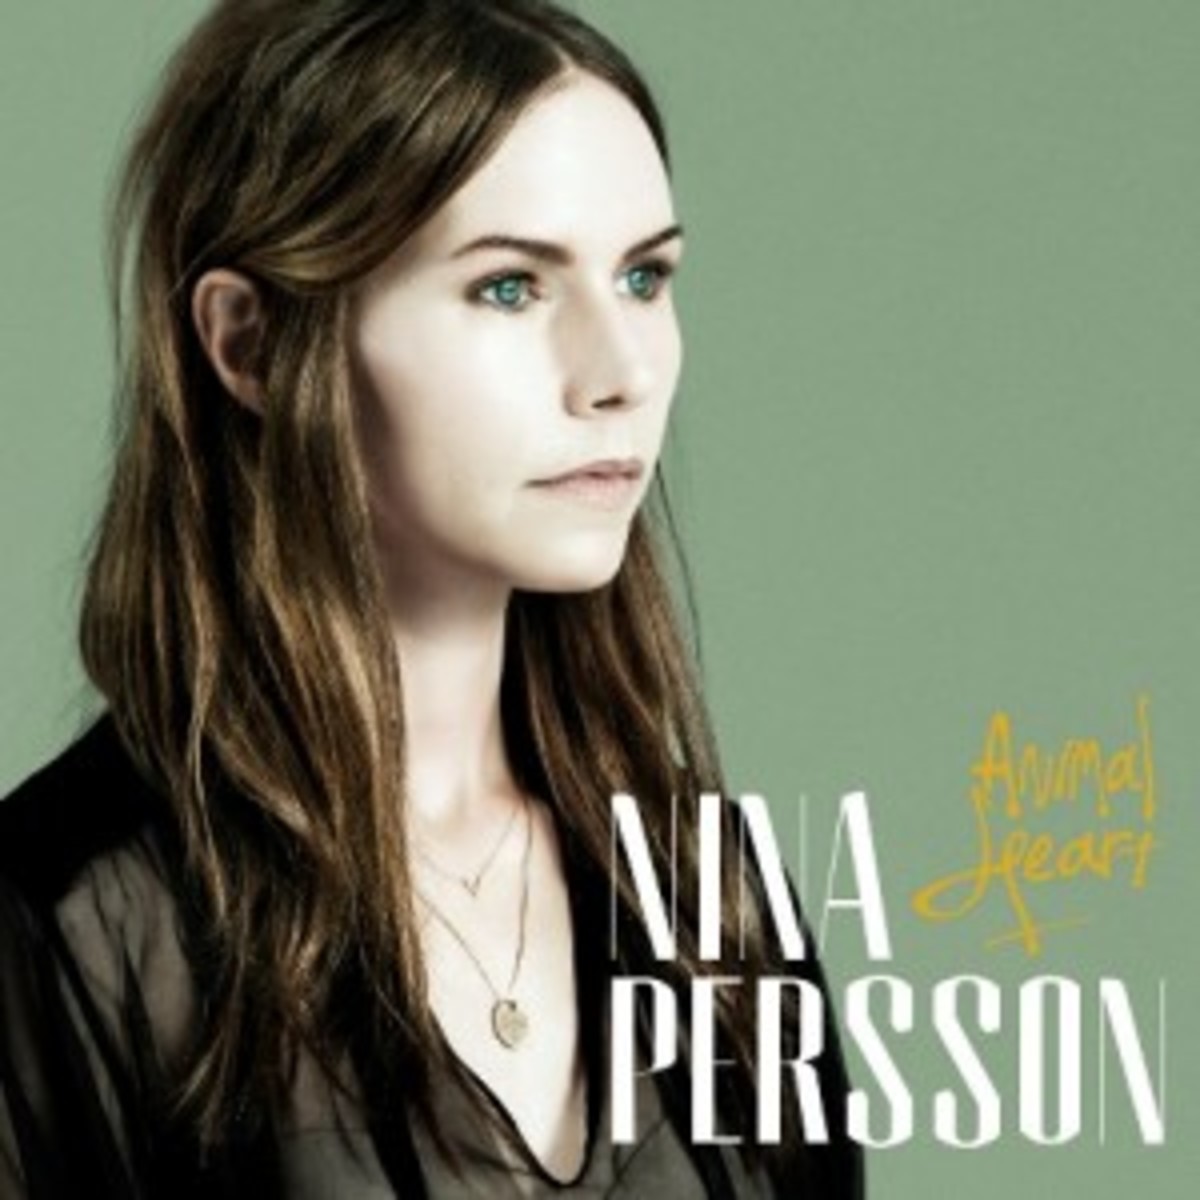 Nina Persson, The Cardigans’ lead vocalist, has released her debut solo album, which is titled Animal Heart.